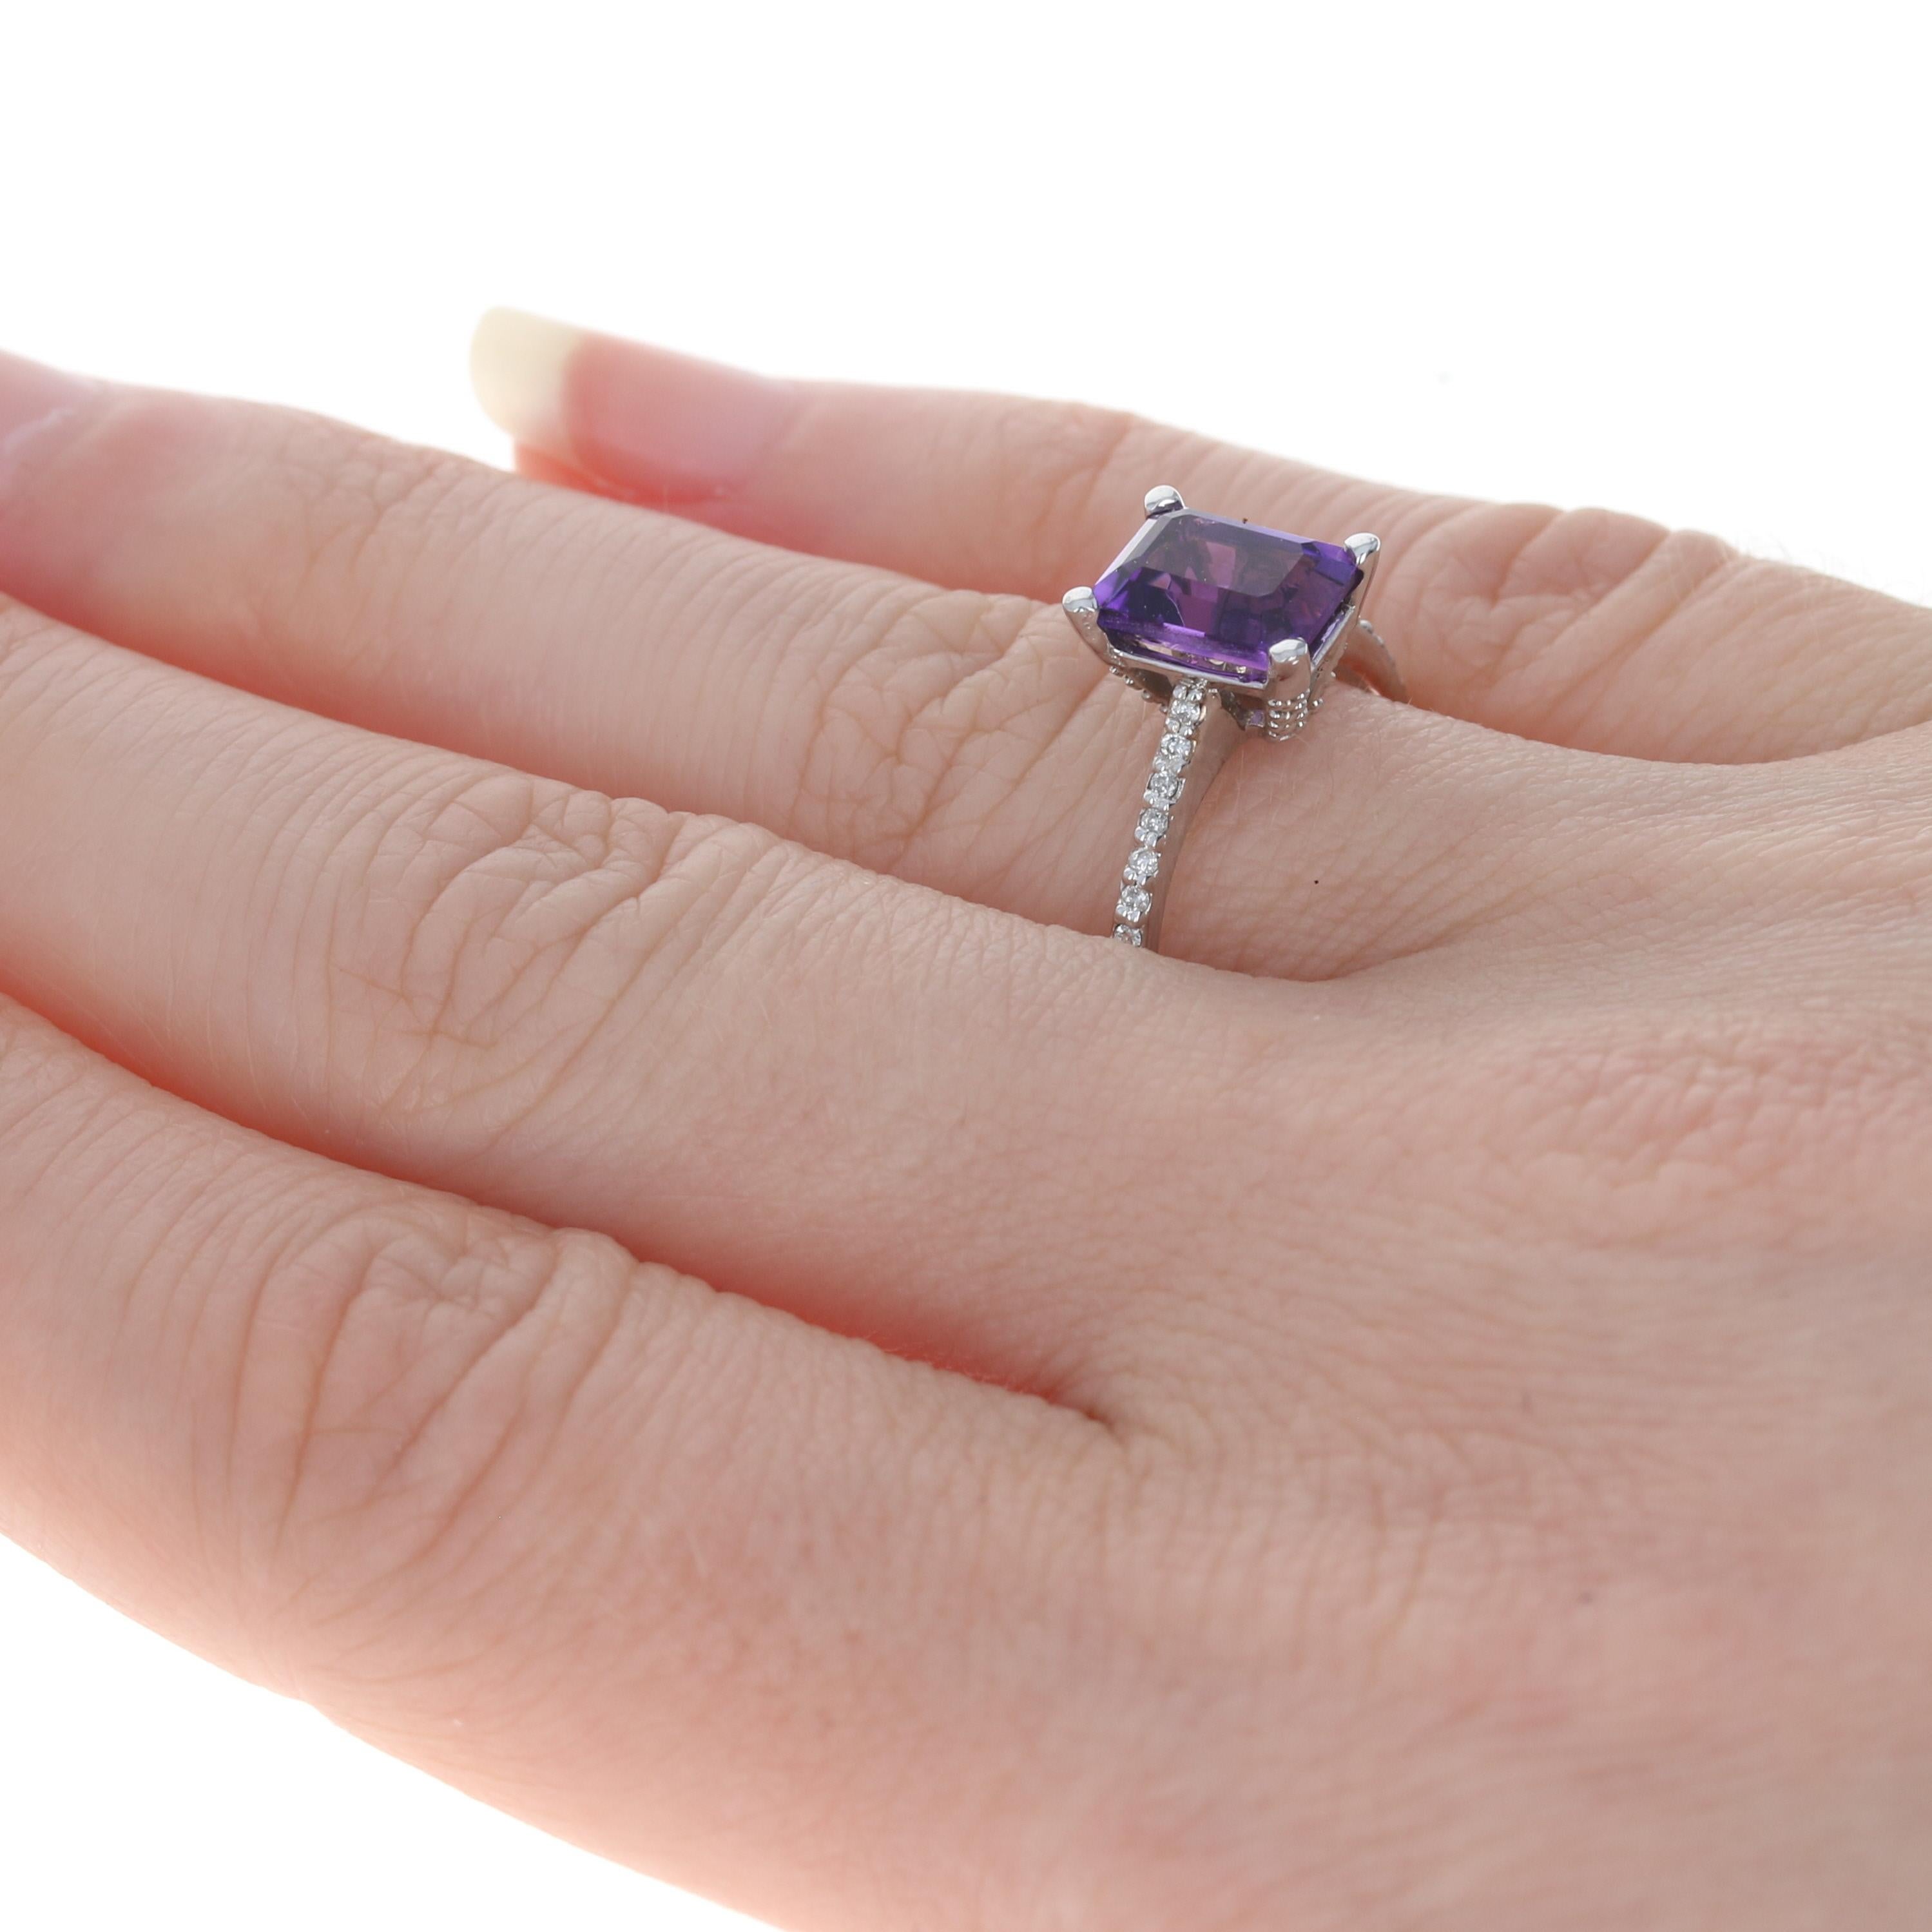 For Sale:  New Amethyst & Diamond Ring, 10k White Gold Emerald Cut 1.66ctw 4